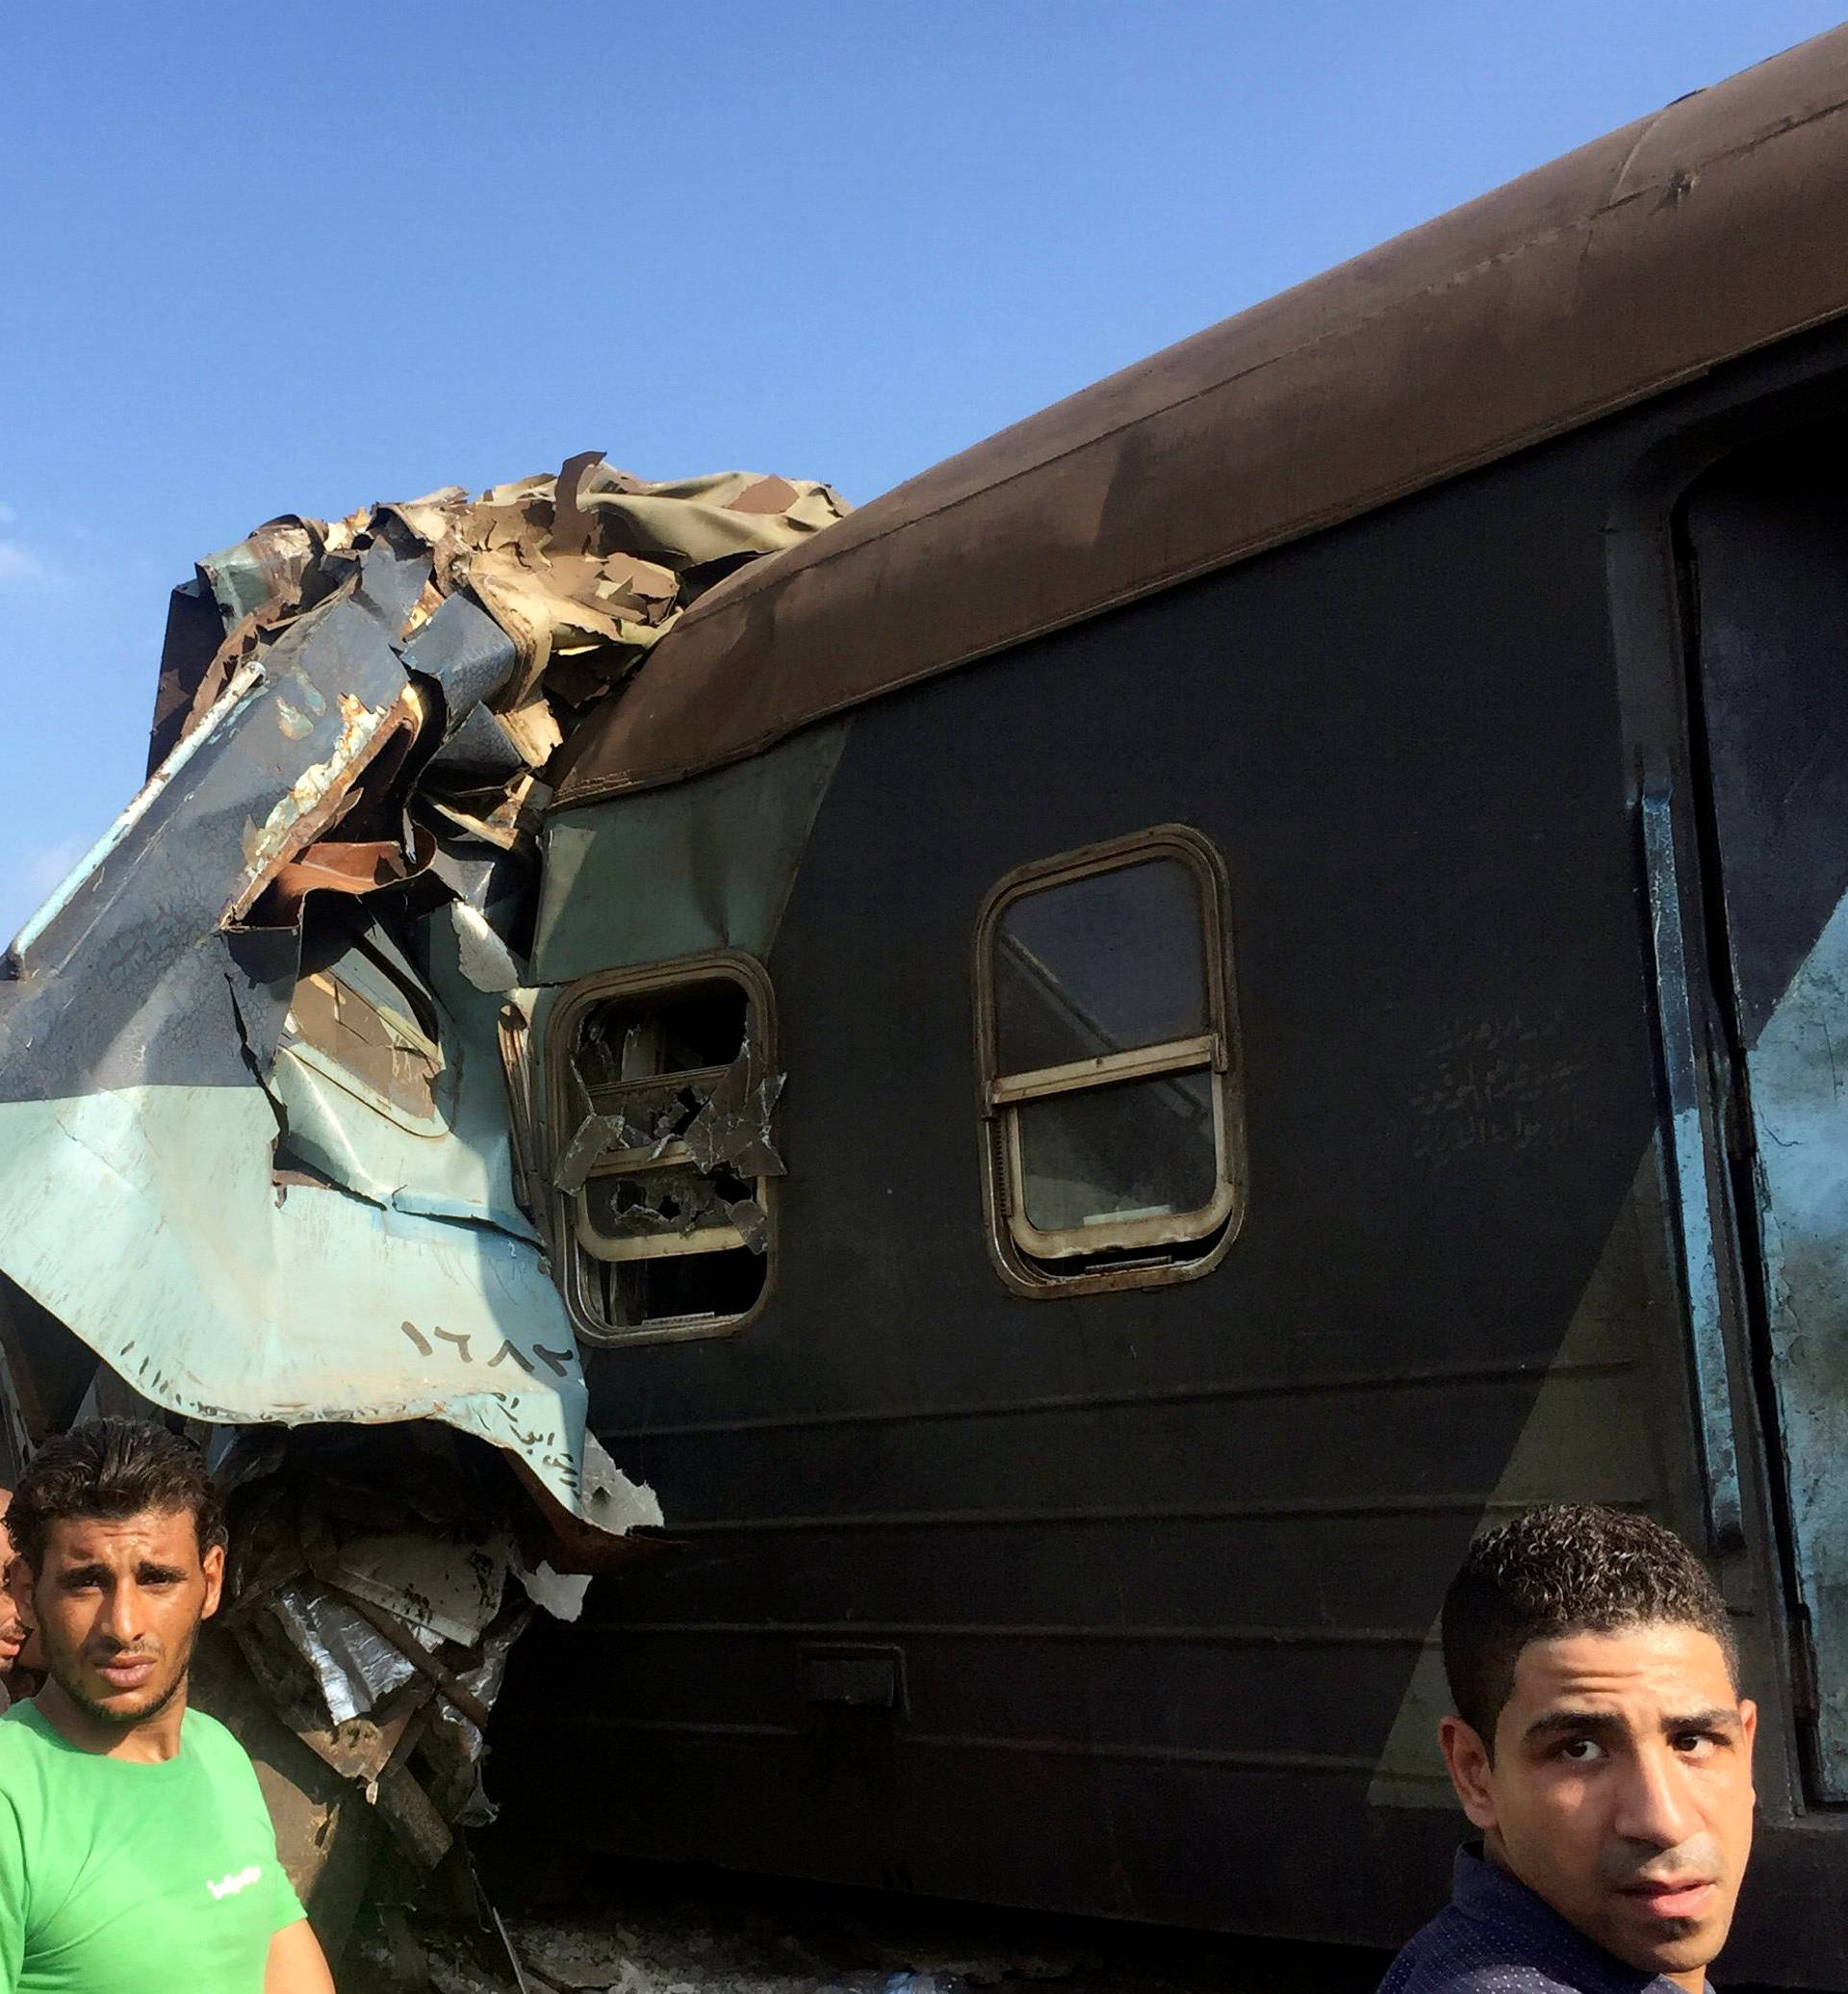 Egyptians look at the crash of two trains that collided near the Khorshid station in Egypt's coastal city of Alexandria